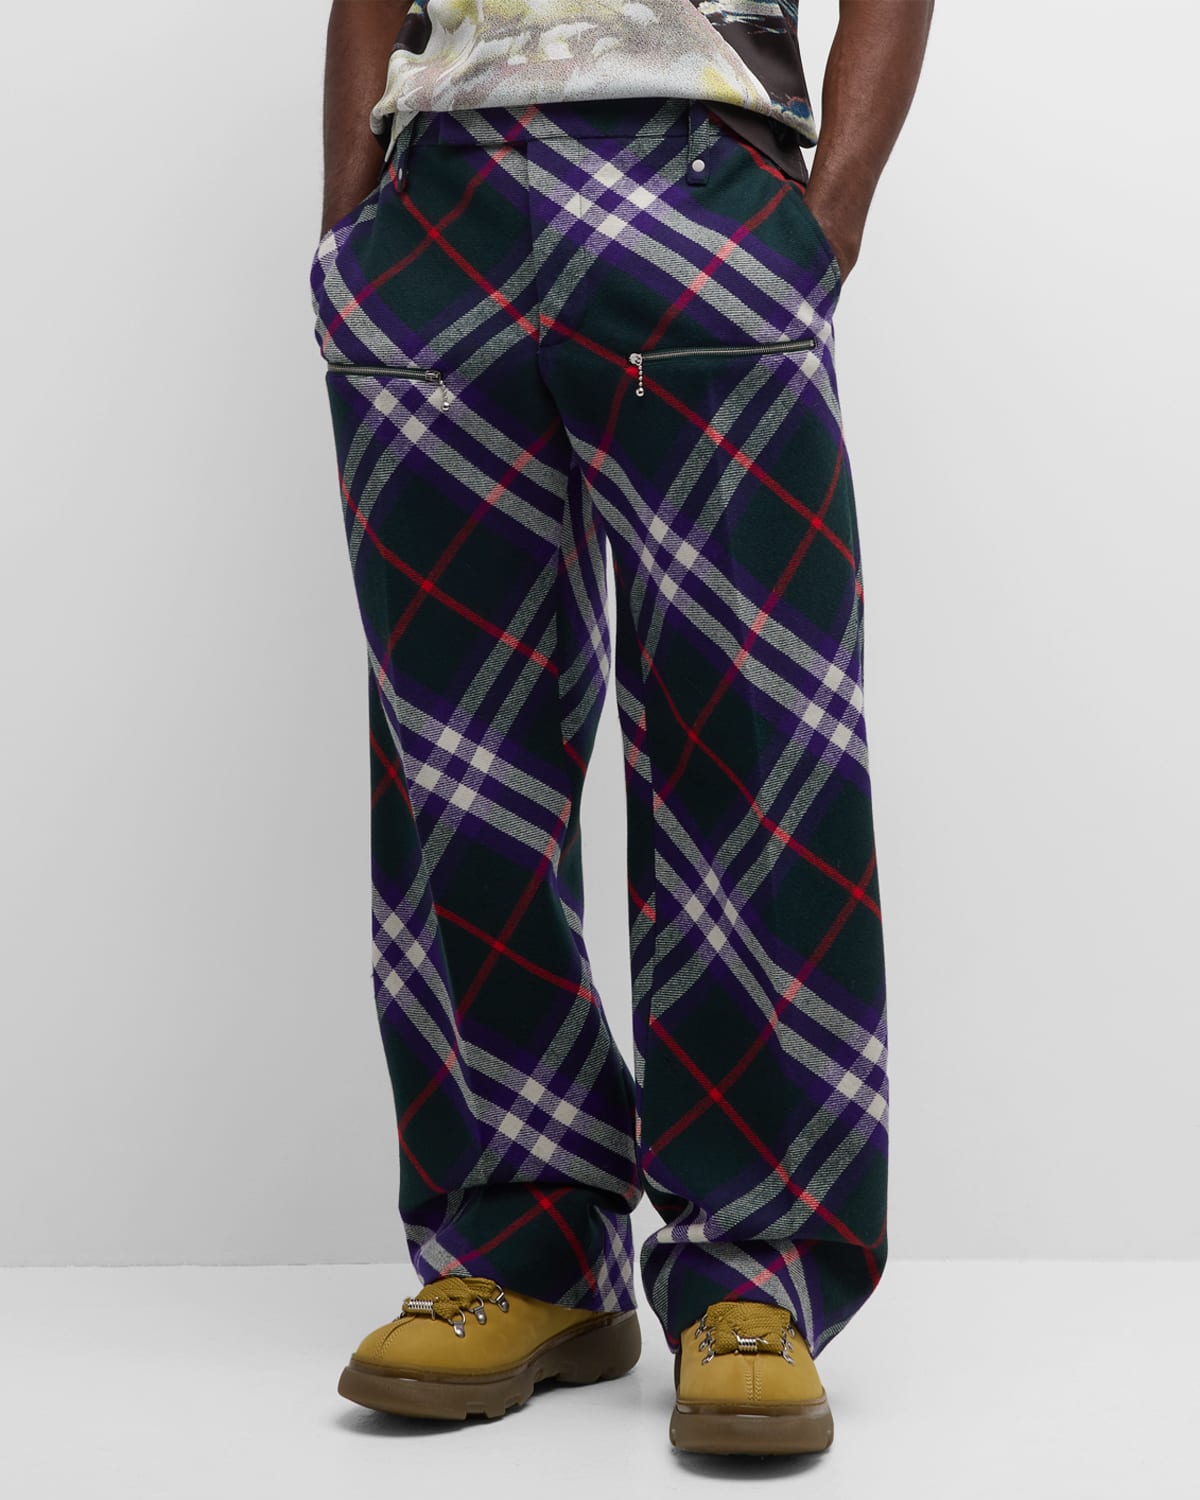 Men's Multi-Check Pants with Zippers